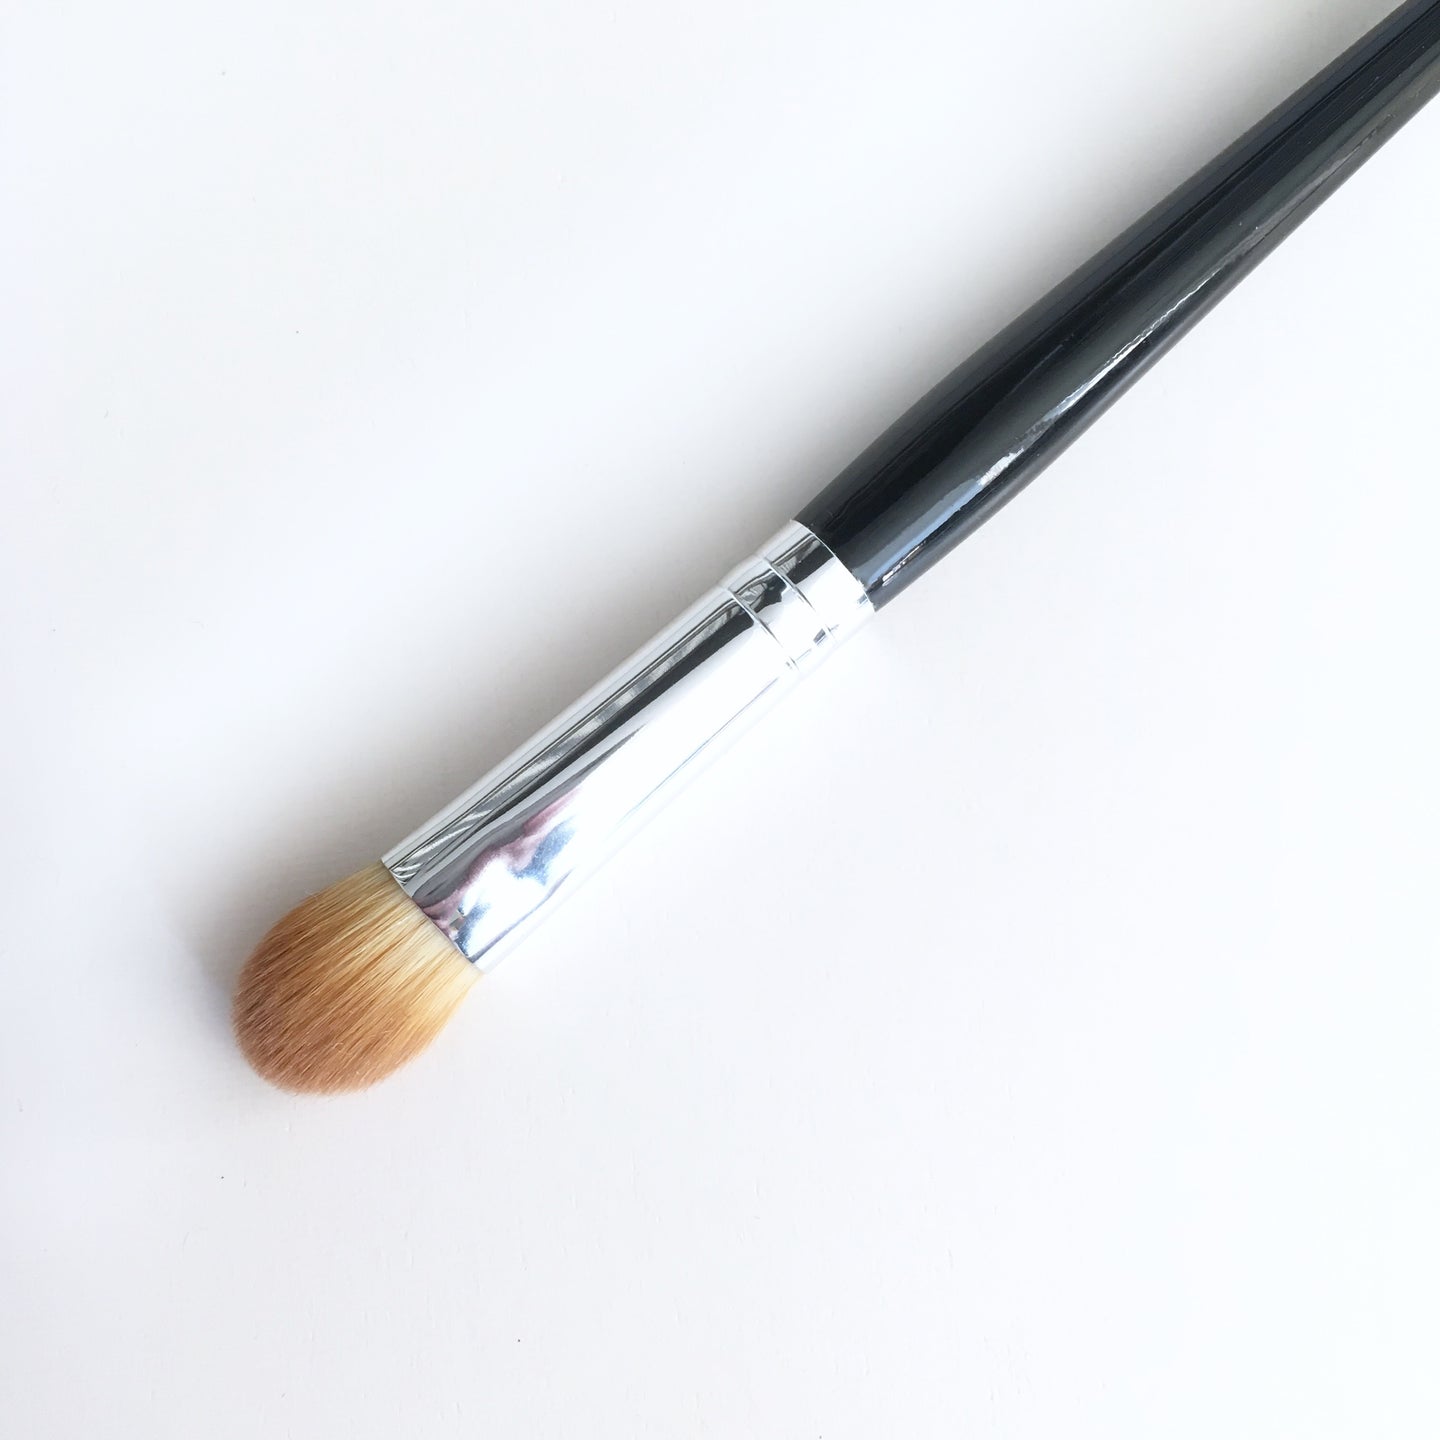 UNDER-ALL-OVER eyeshadow/concealer brush - M.E. cosmetics